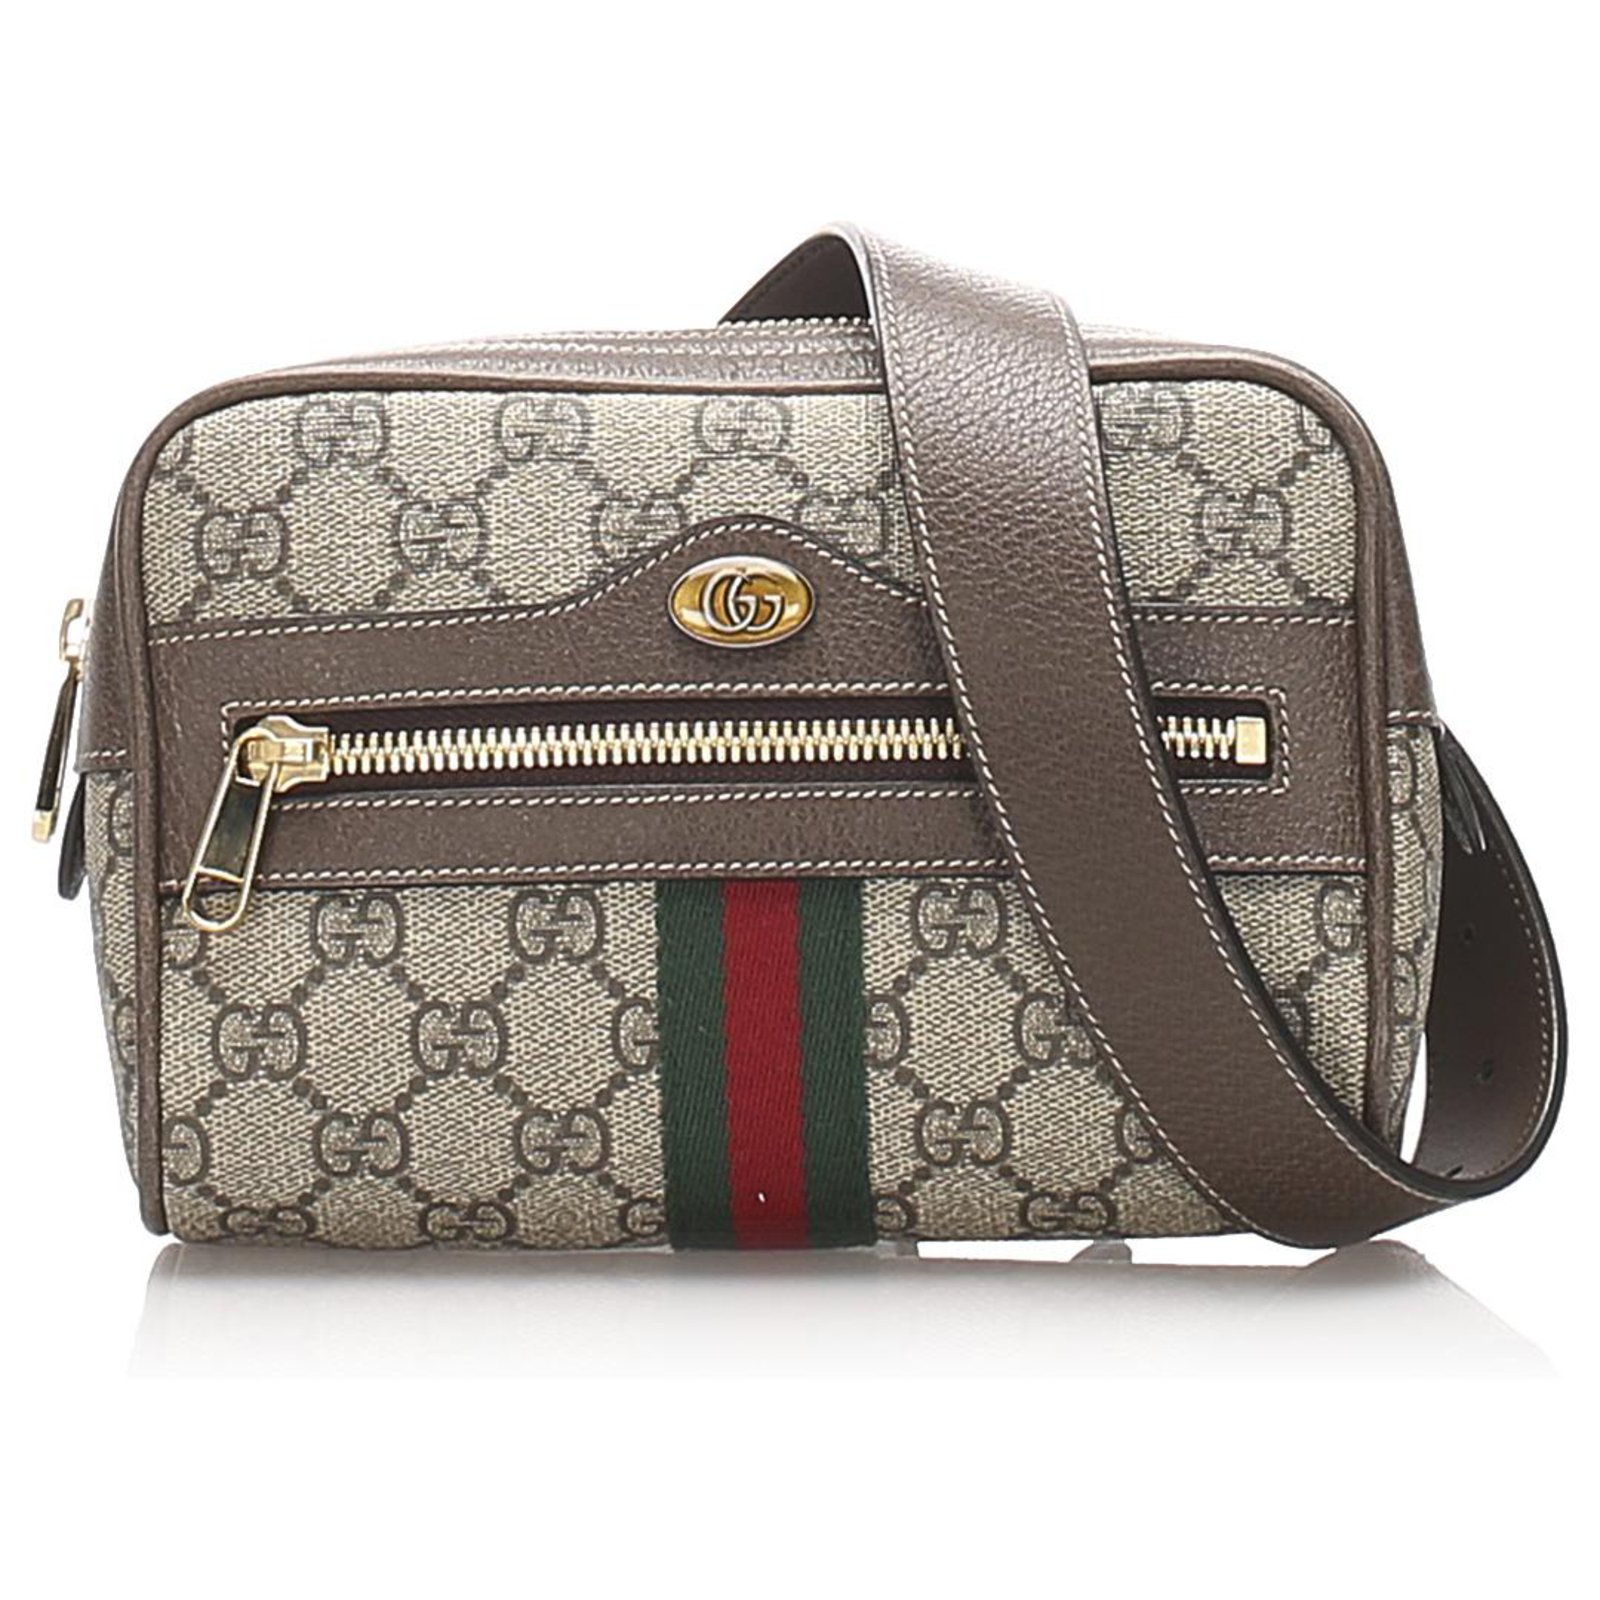 Ophidia Small GG Canvas Belt Bag in Beige - Gucci